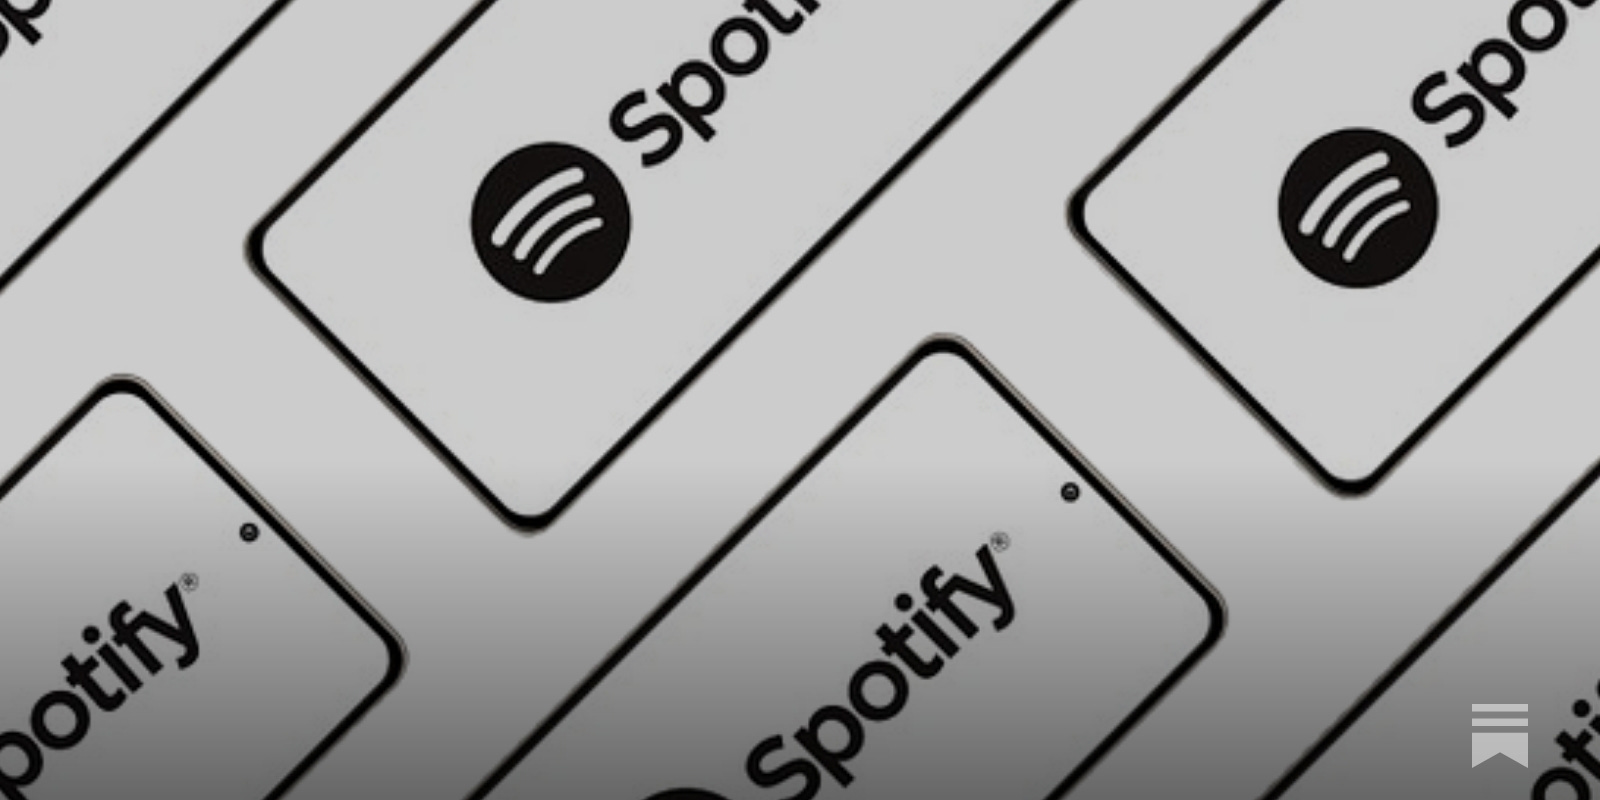 Spotify Wrapped: Here's How Spotify Calculates Your Listening Data